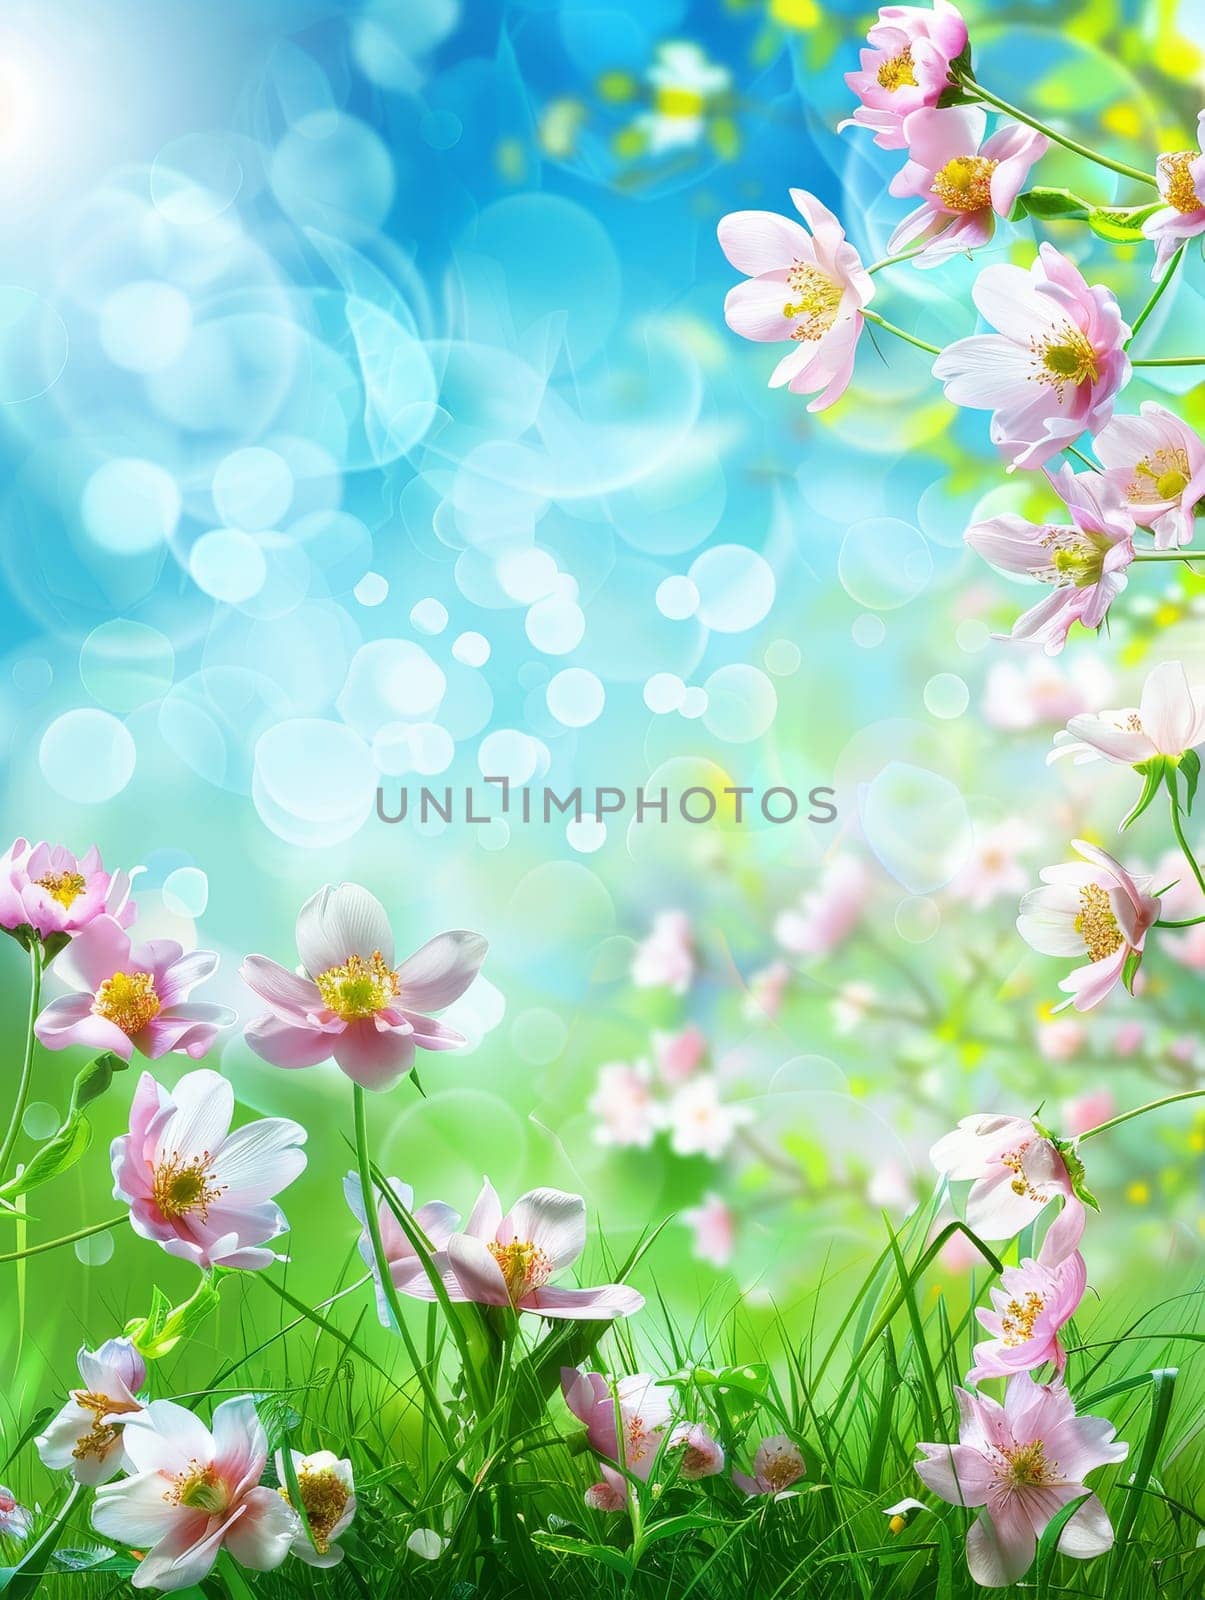 Pink spring blossoms foreground a magical bokeh effect that captures the light's playfulness. The image evokes the enchanting atmosphere of a fairy tale.